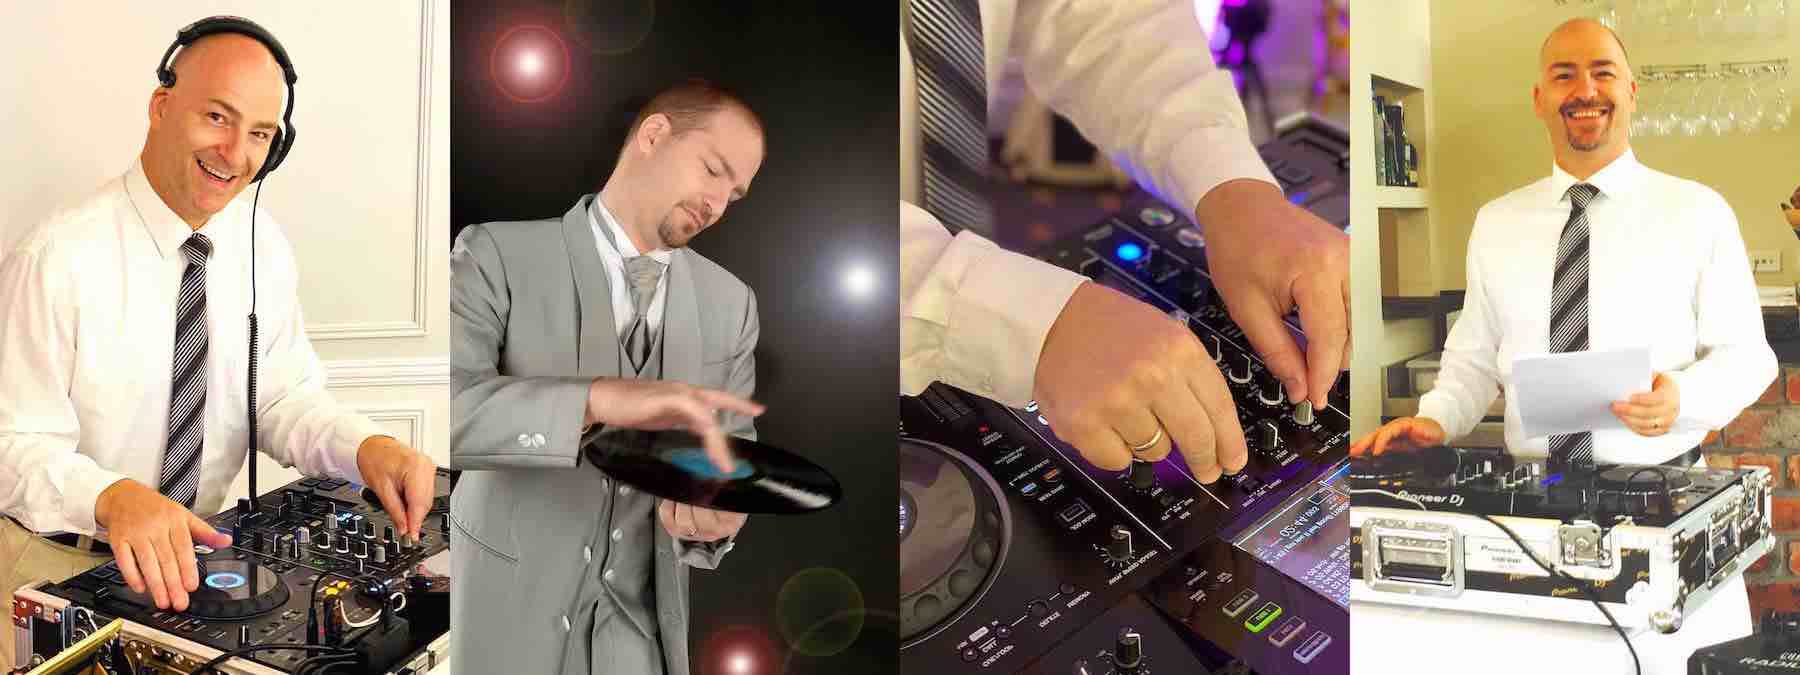 4 images of DJ Ian Wagner on the decks